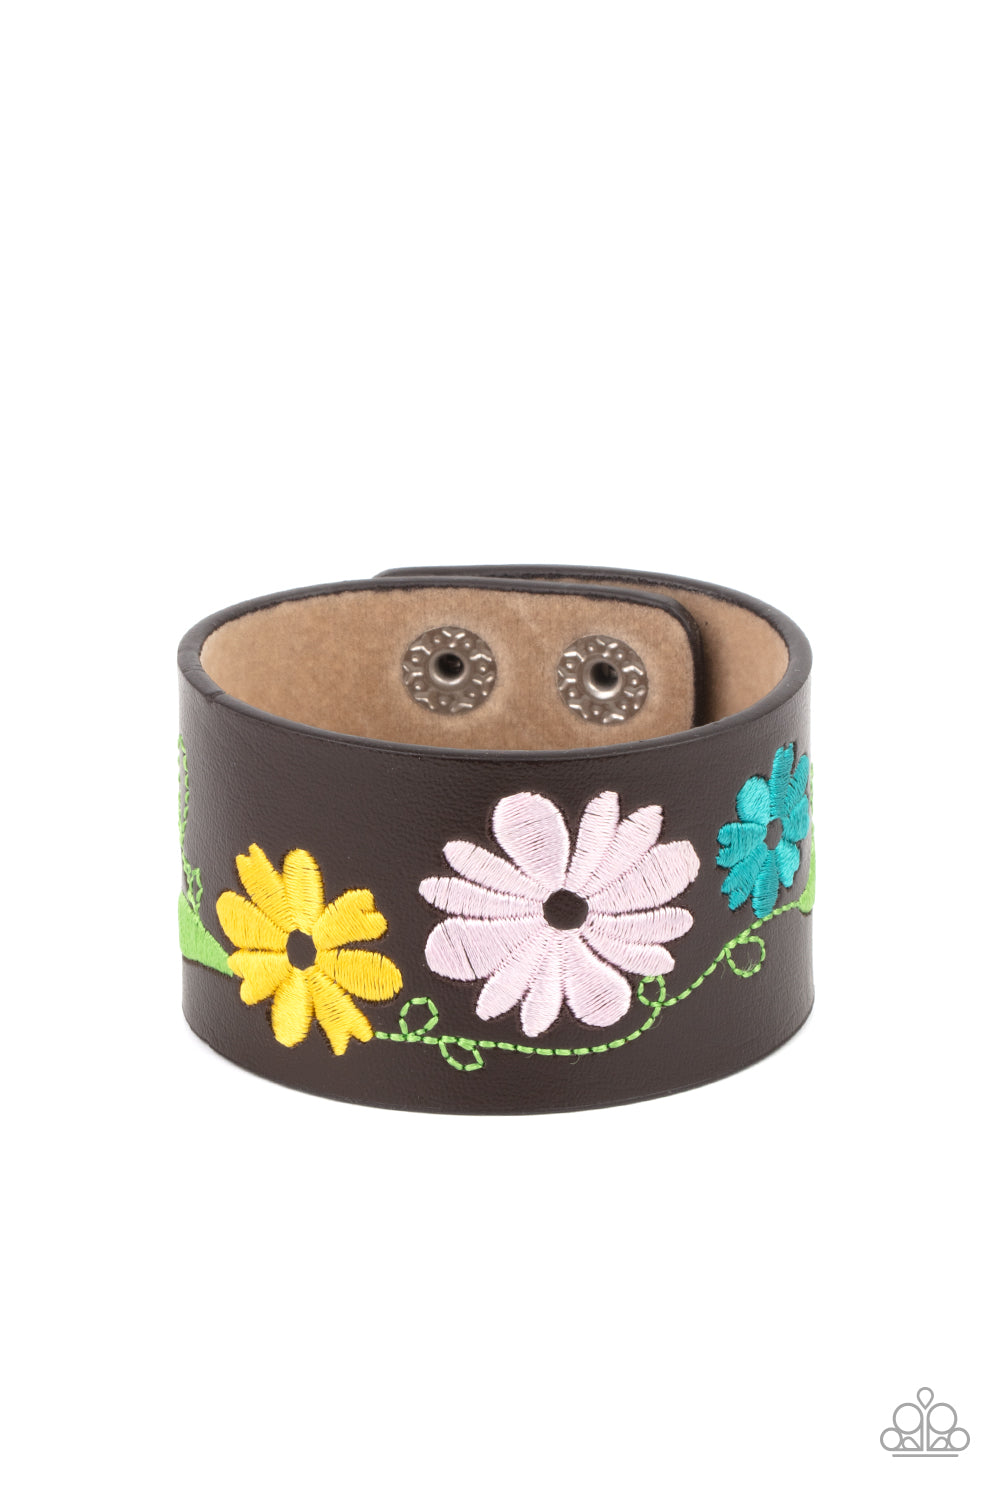 Western Eden Multi Wrap Bracelet - Paparazzi Accessories  A colorful floral pattern is embroidered across the front of a brown leather band, creating a whimsical centerpiece around the wrist. Features an adjustable snap closure.  All Paparazzi Accessories are lead free and nickel free!  Sold as one individual bracelet.